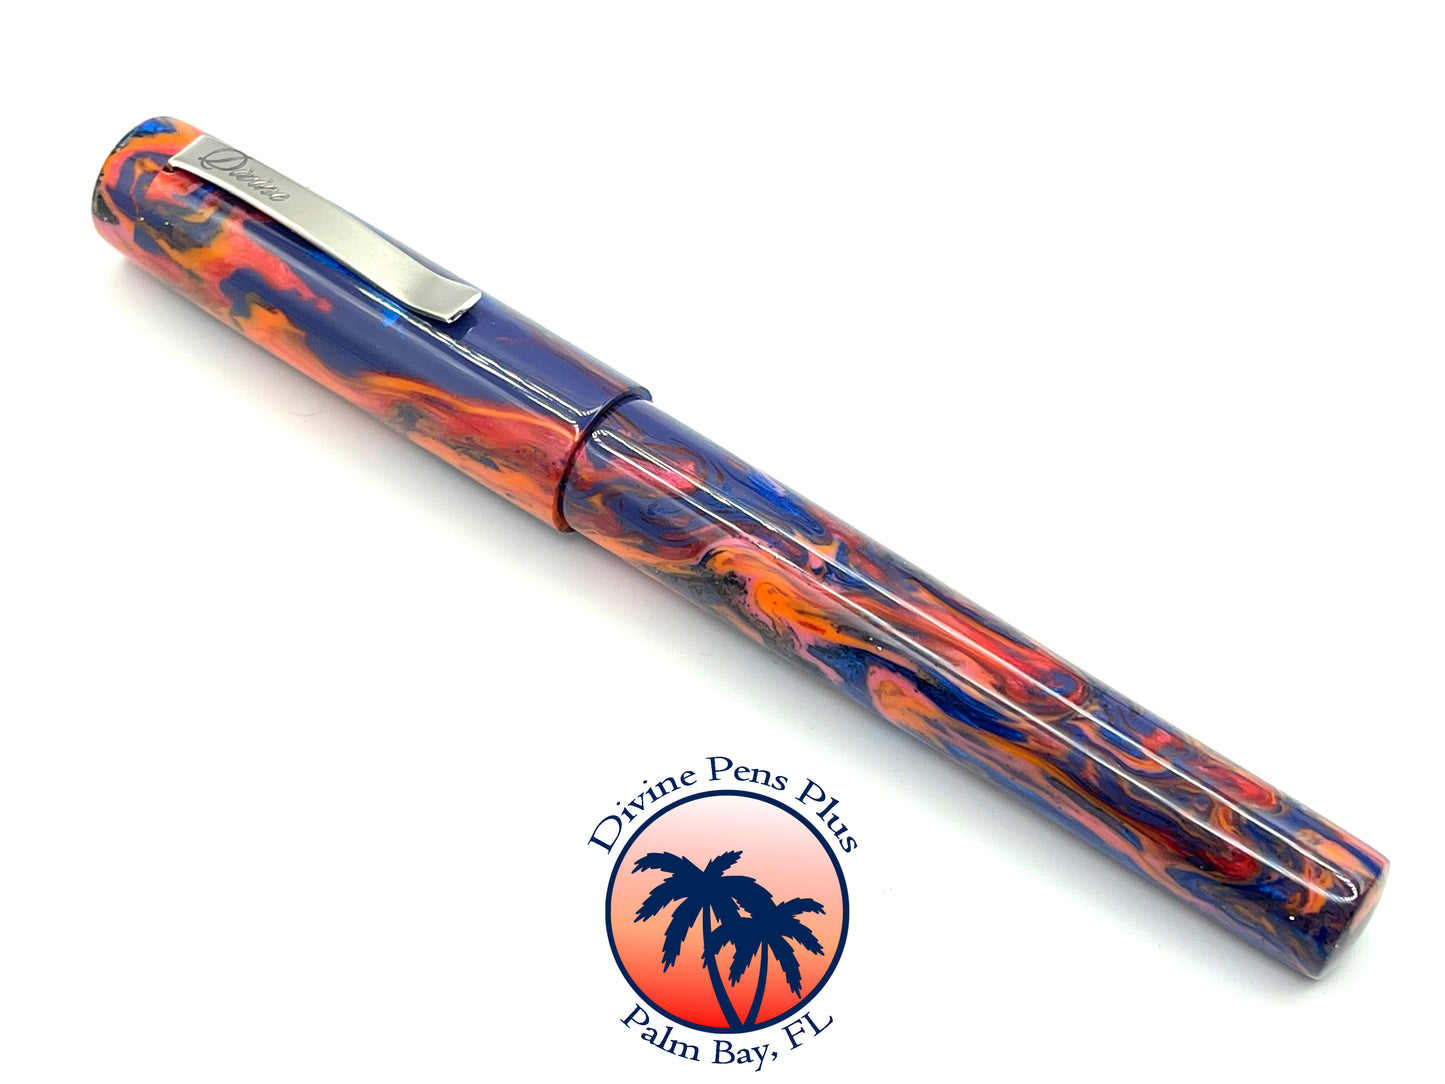 Agape Fountain Pen - "Pursuit of Happiness"